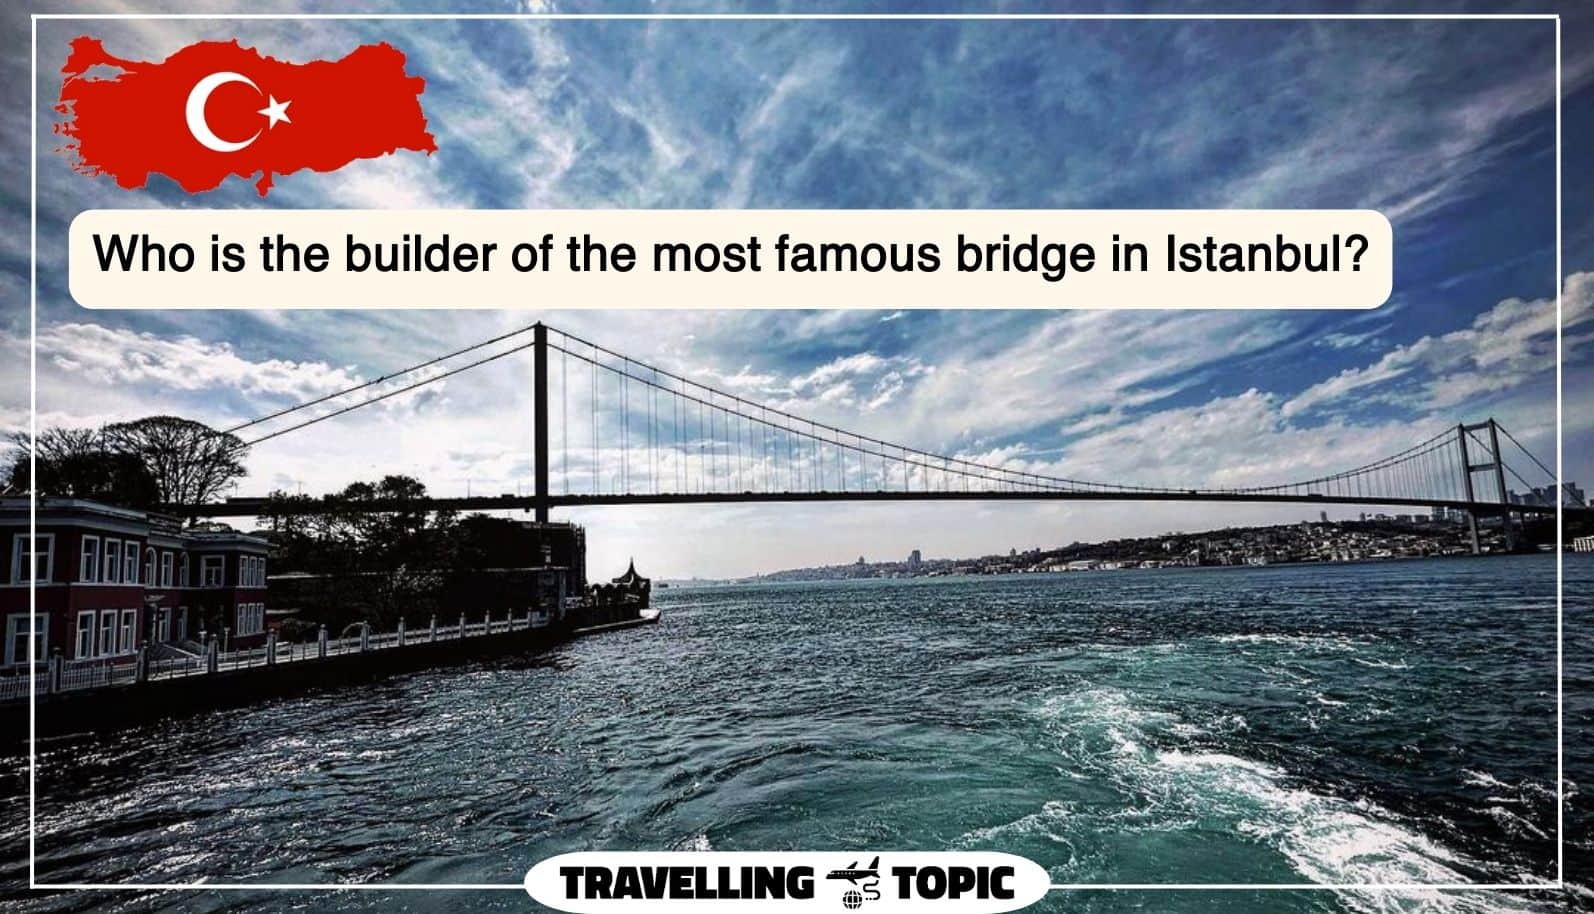 Who is the builder of the most famous bridge in Istanbul?